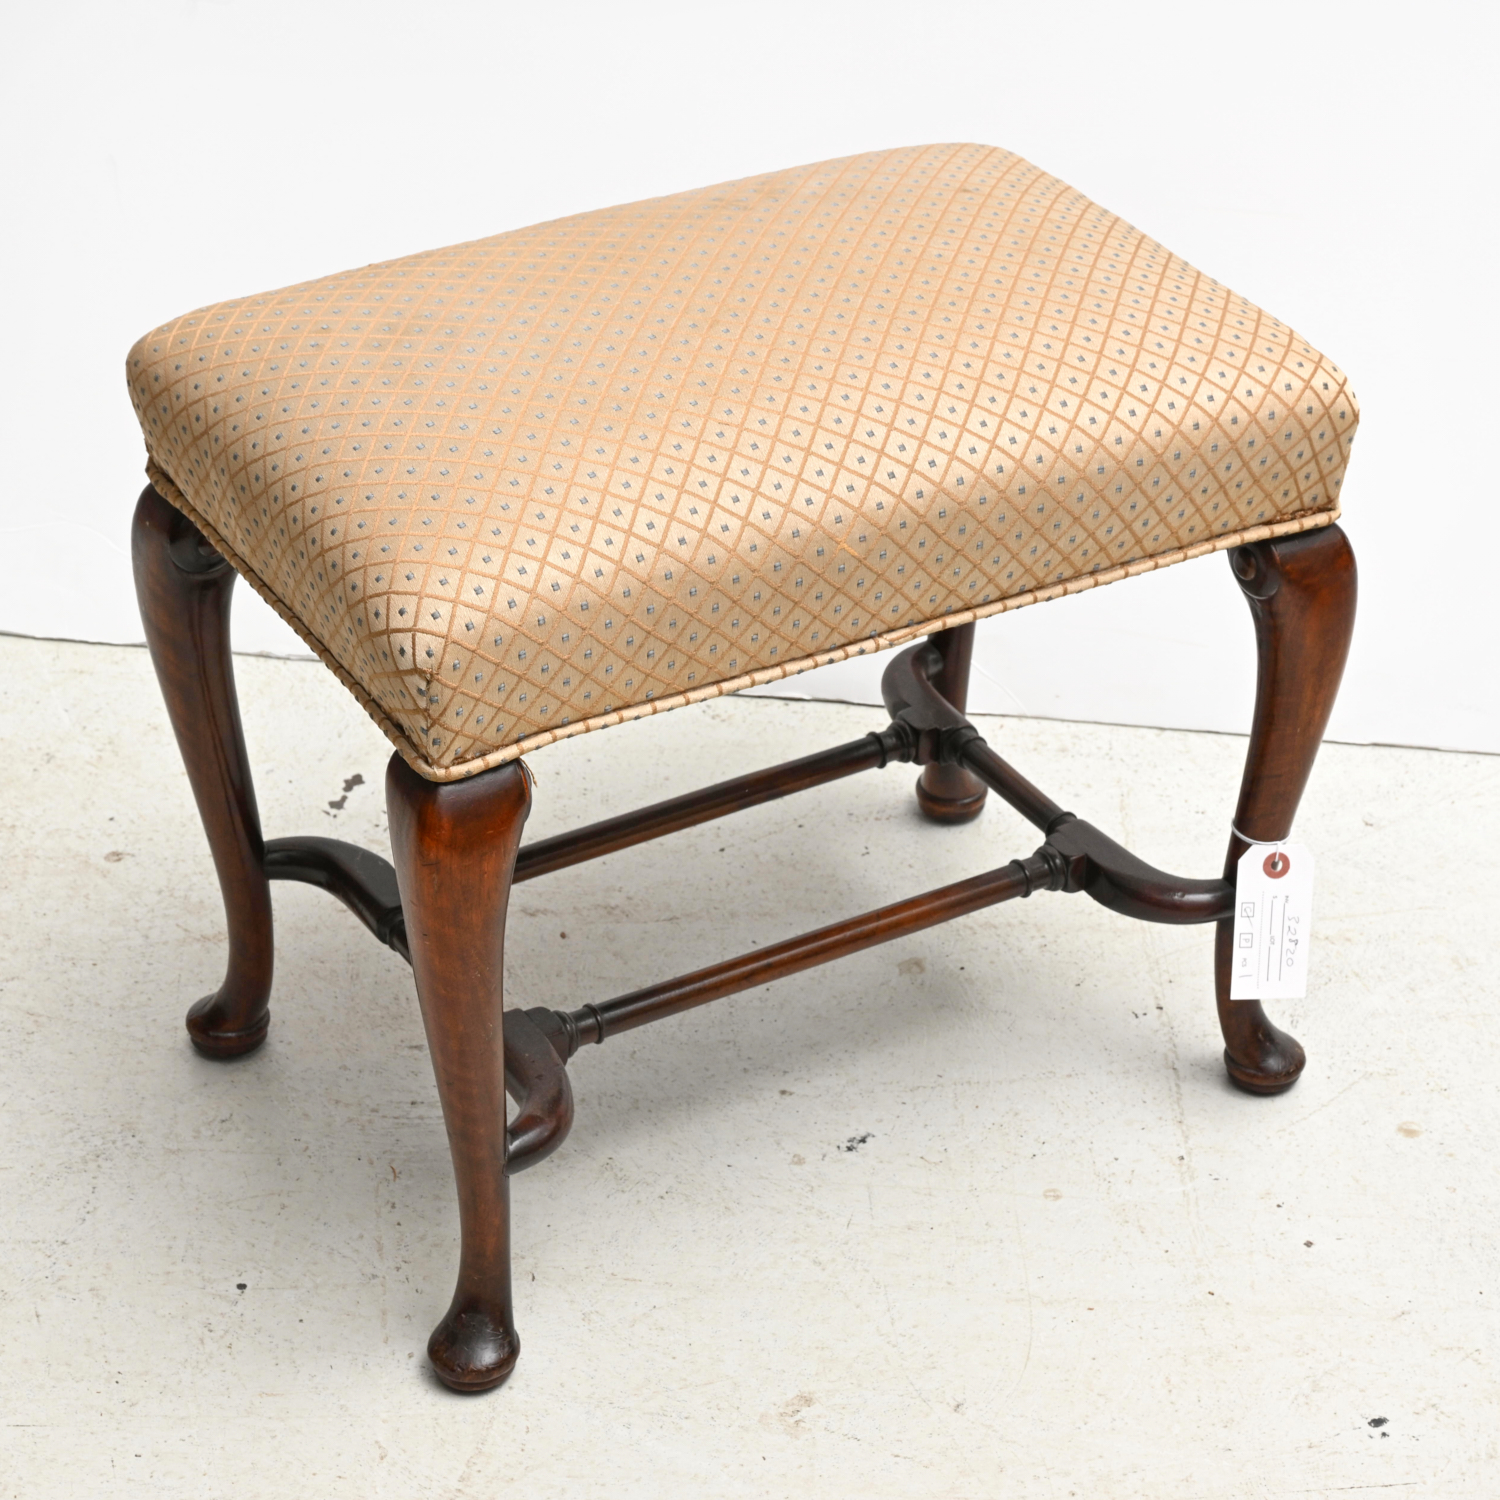 QUEEN ANNE STYLE UPHOLSTERED STOOL 2ce65d